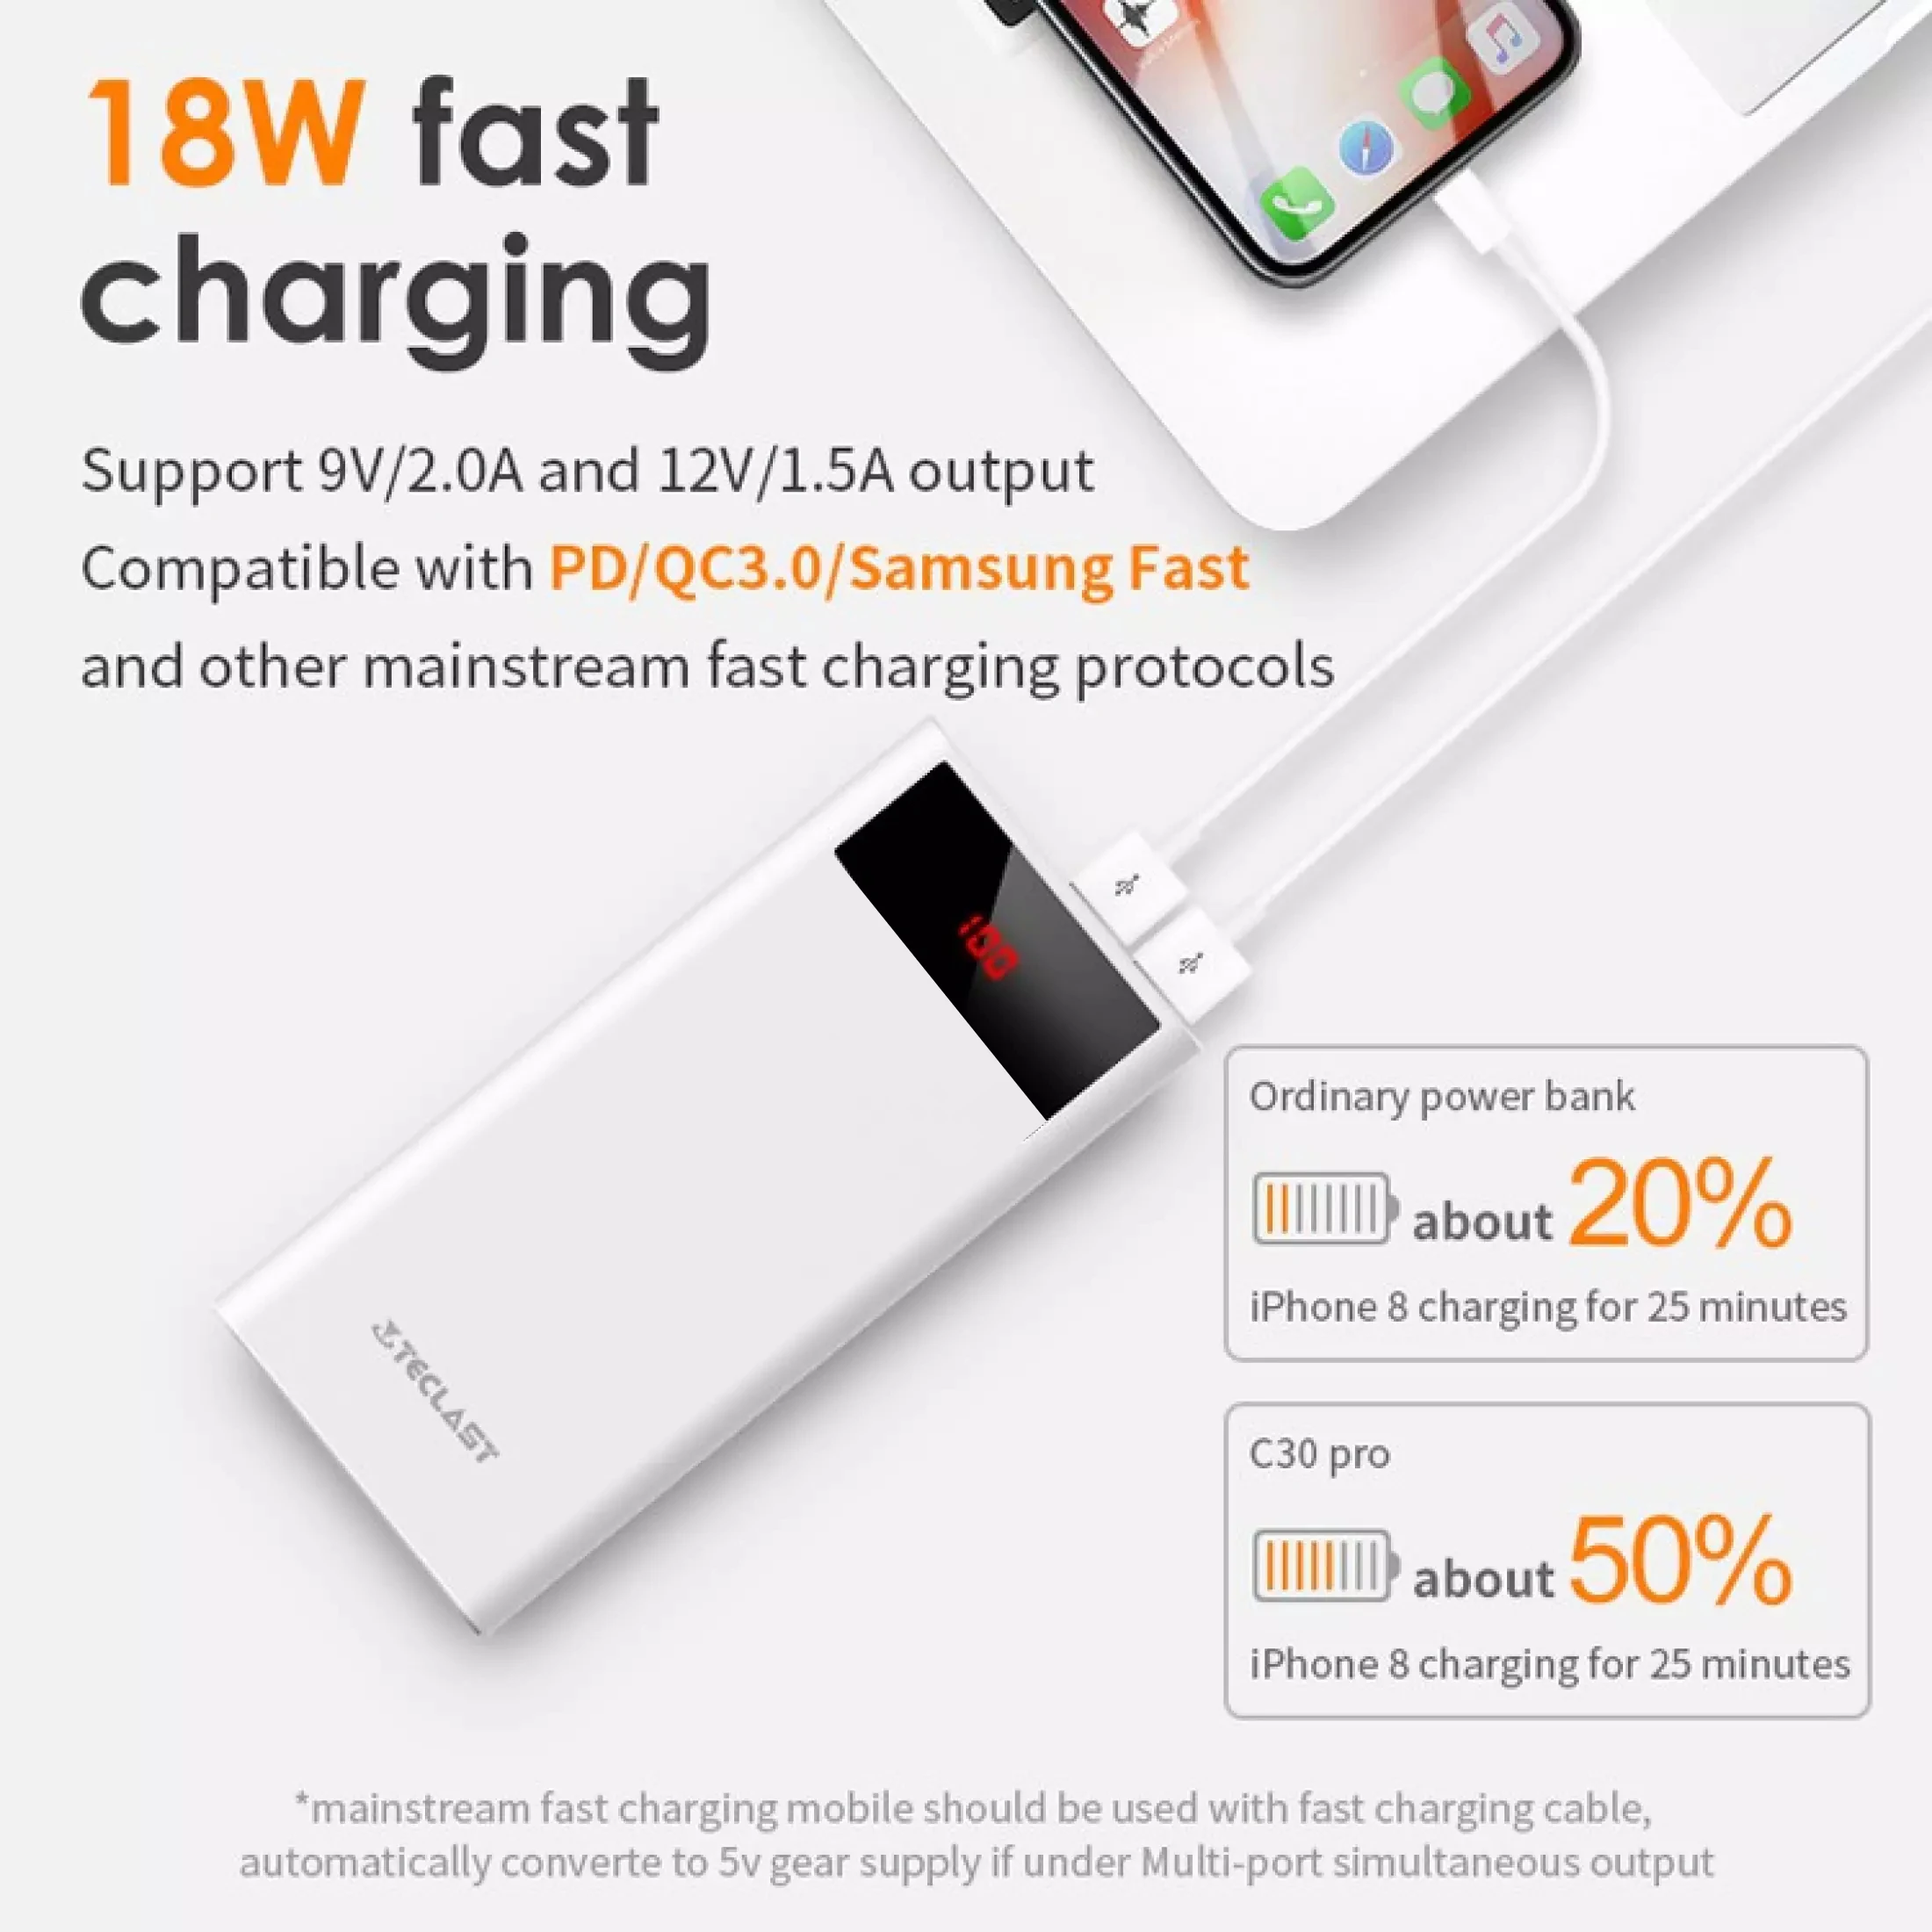 usb power bank TECLAST Power Bank 22.5W 30000mAh Portable Fast Charging Powerbank PD 18W Qucik Charge Poverbank for iPhone Huawei Xiaomi wireless battery pack